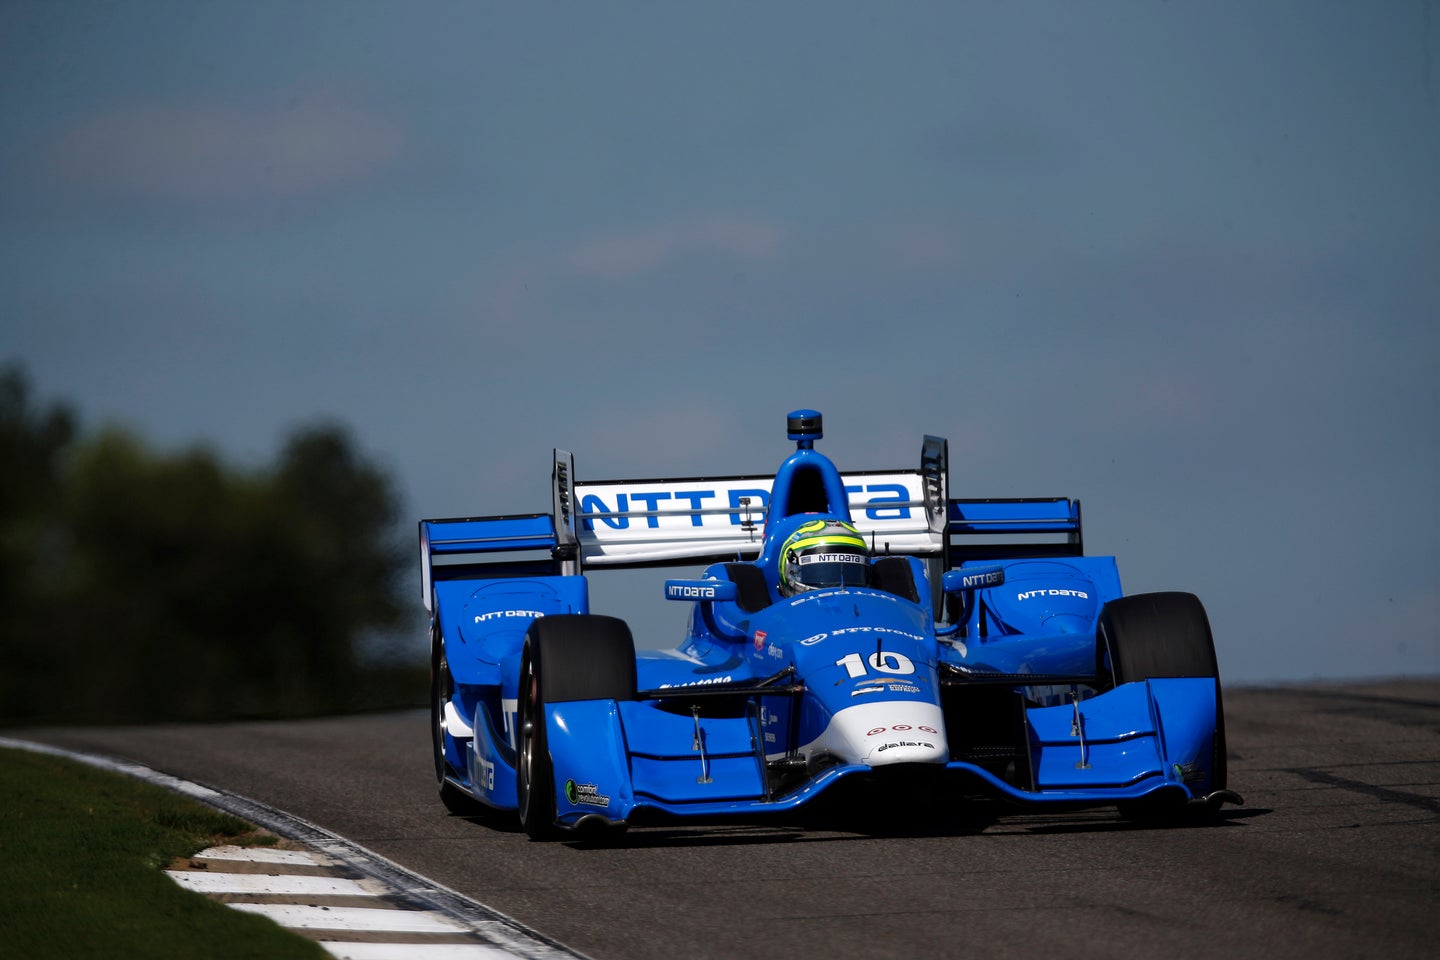 At this weekend's Firestone 600 at Texas Motor Speedway, in Fort Worth, Tony Kanaan will be the only driver measuring his breathing, heart rate, and muscle tension via NTT Data's Hitoe sensor shirt.